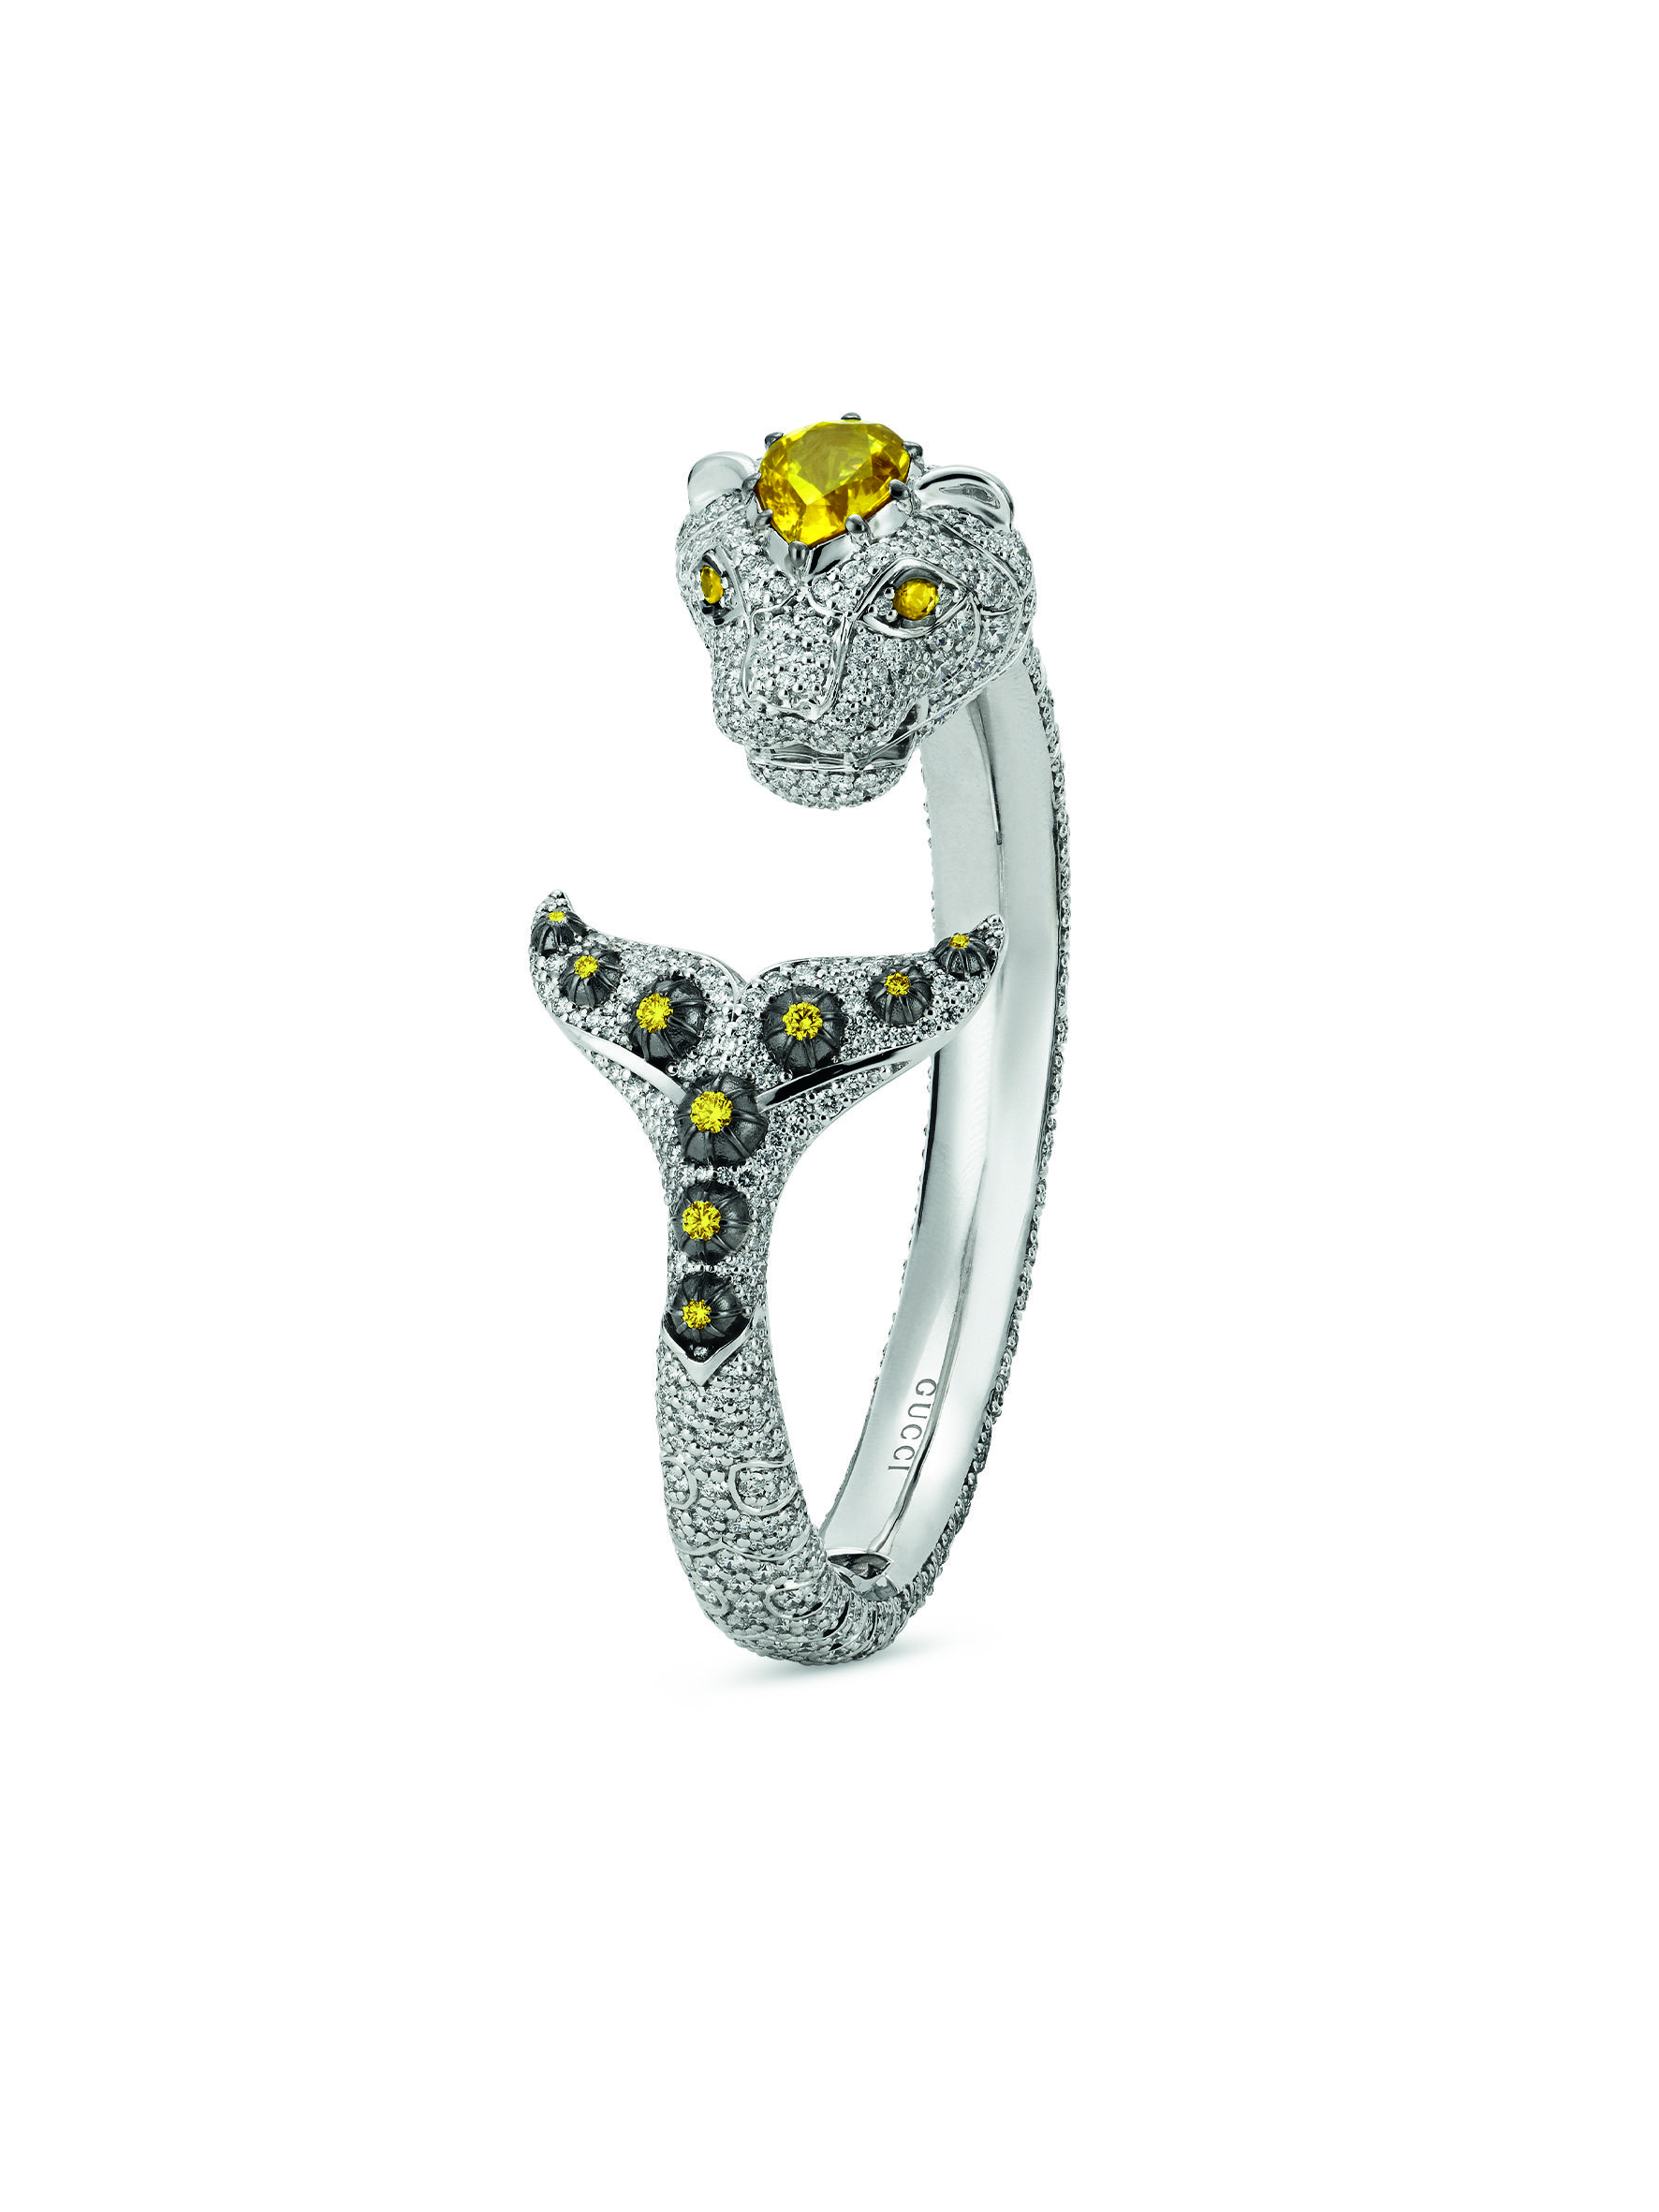 Jewelry News: Summer Garden–Inspired Designs from Dior and Graff